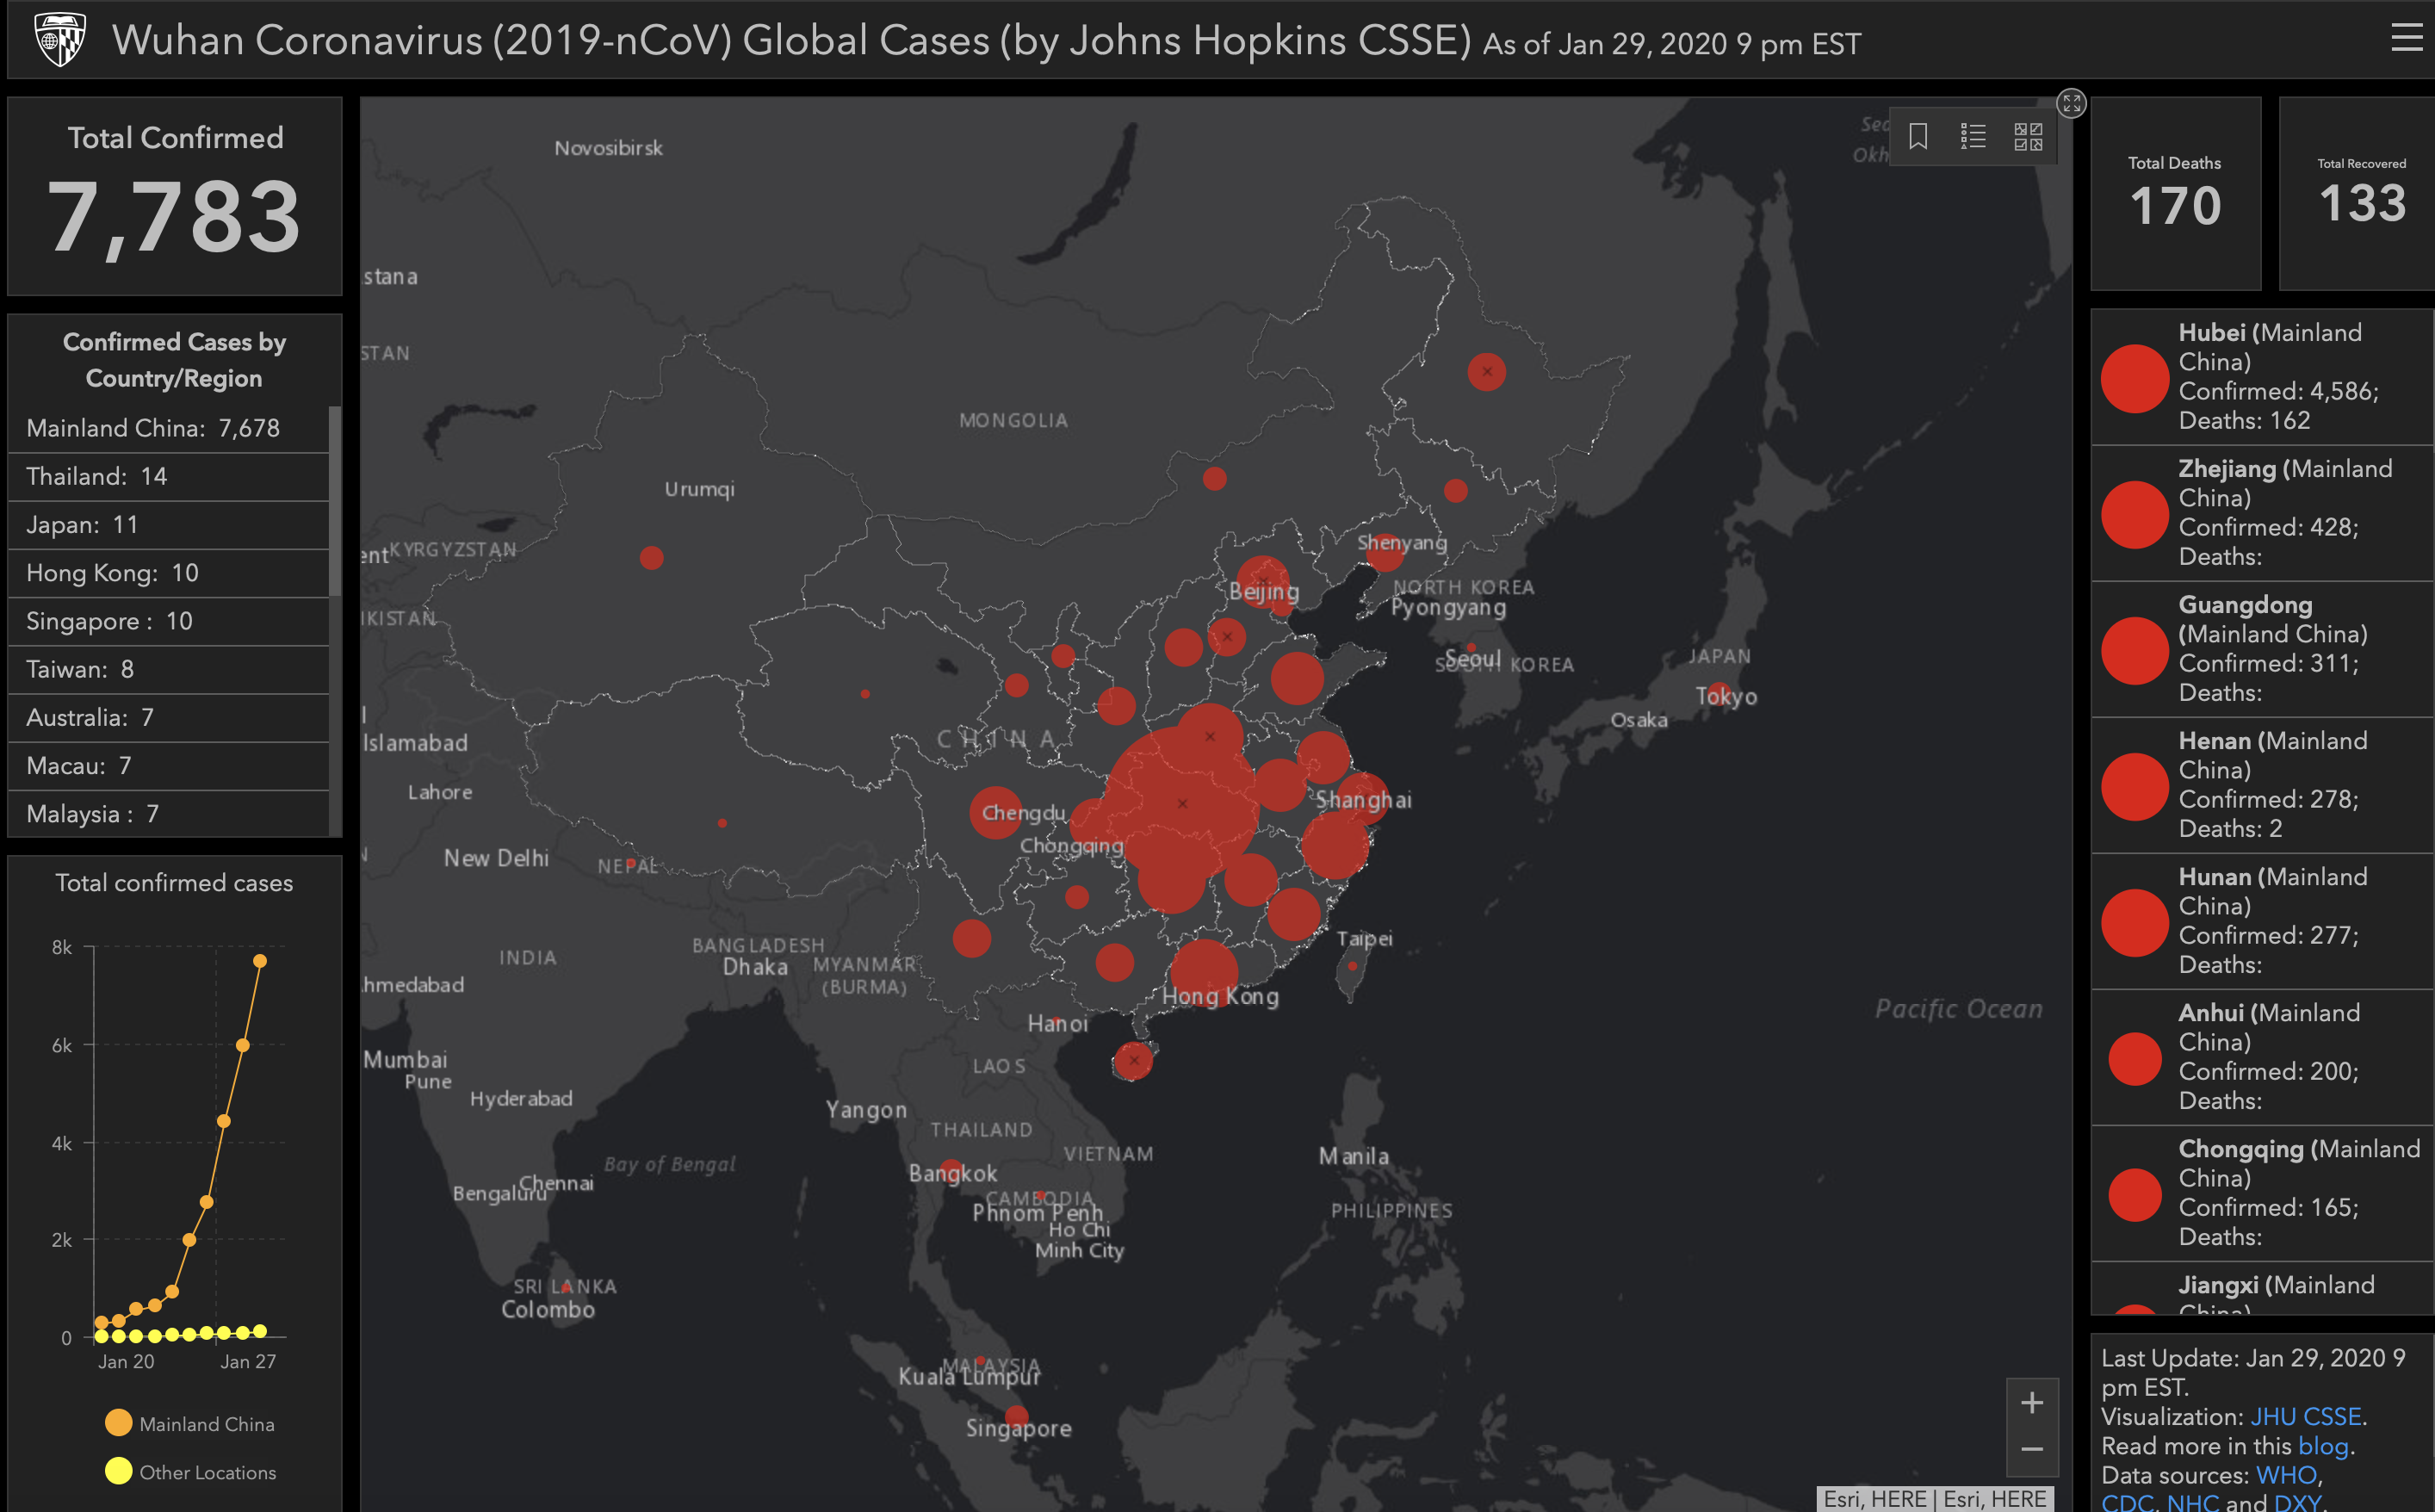 The coronavirus case map updates in real time as global health agencies confirm more cases.